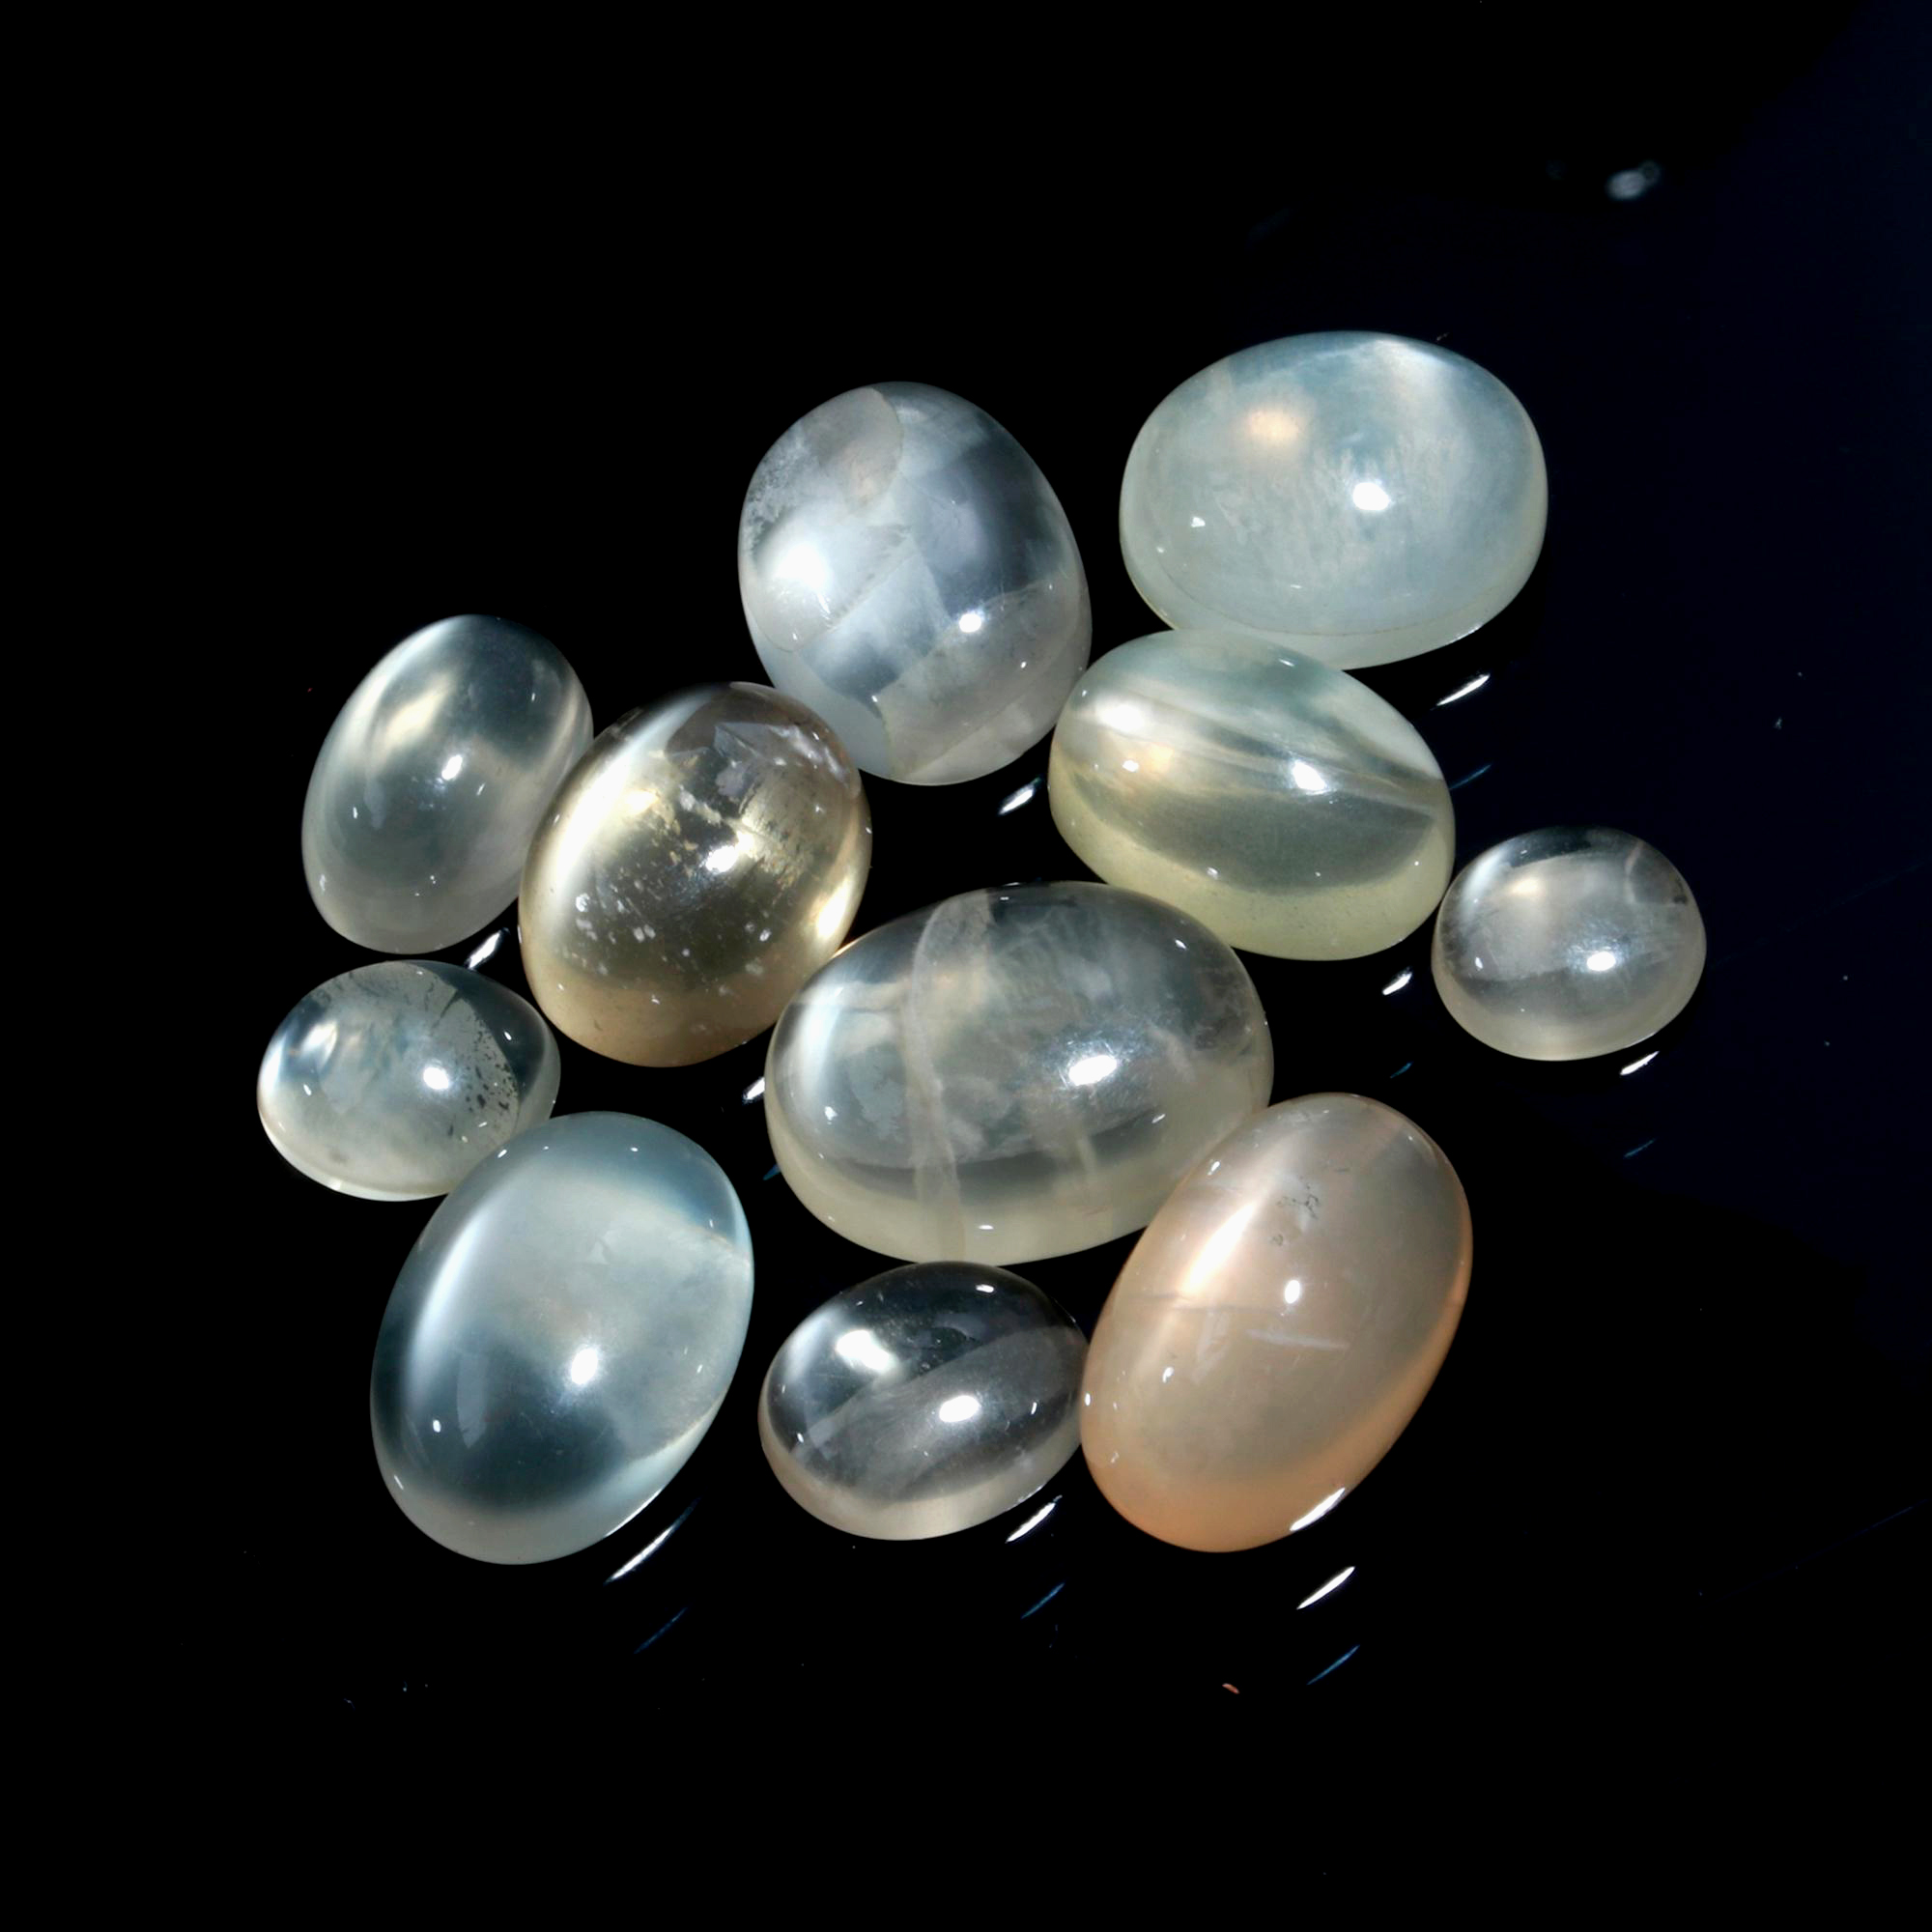 11 Pcs. 50Cts. Natural White Rainbow Moonstone polished Mix Cabochon Wholesale Loose Lot Size 15x9 9x7mm Gemstone for jewelry#1135